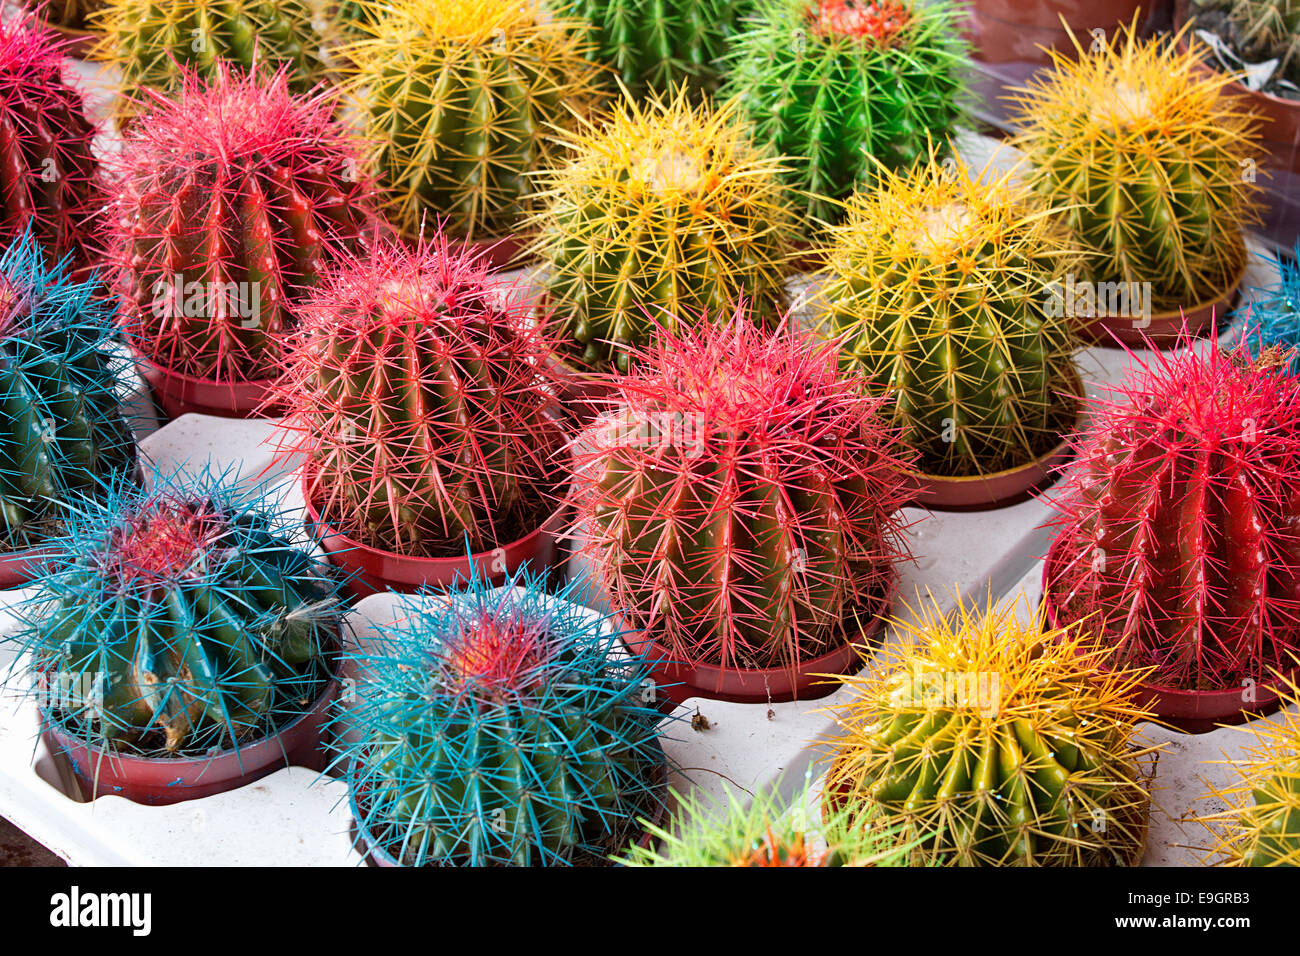 Arrangement of artificially colored cacti at a flower market or nursery the perfect pot plant to match your homes interior color Stock Photo